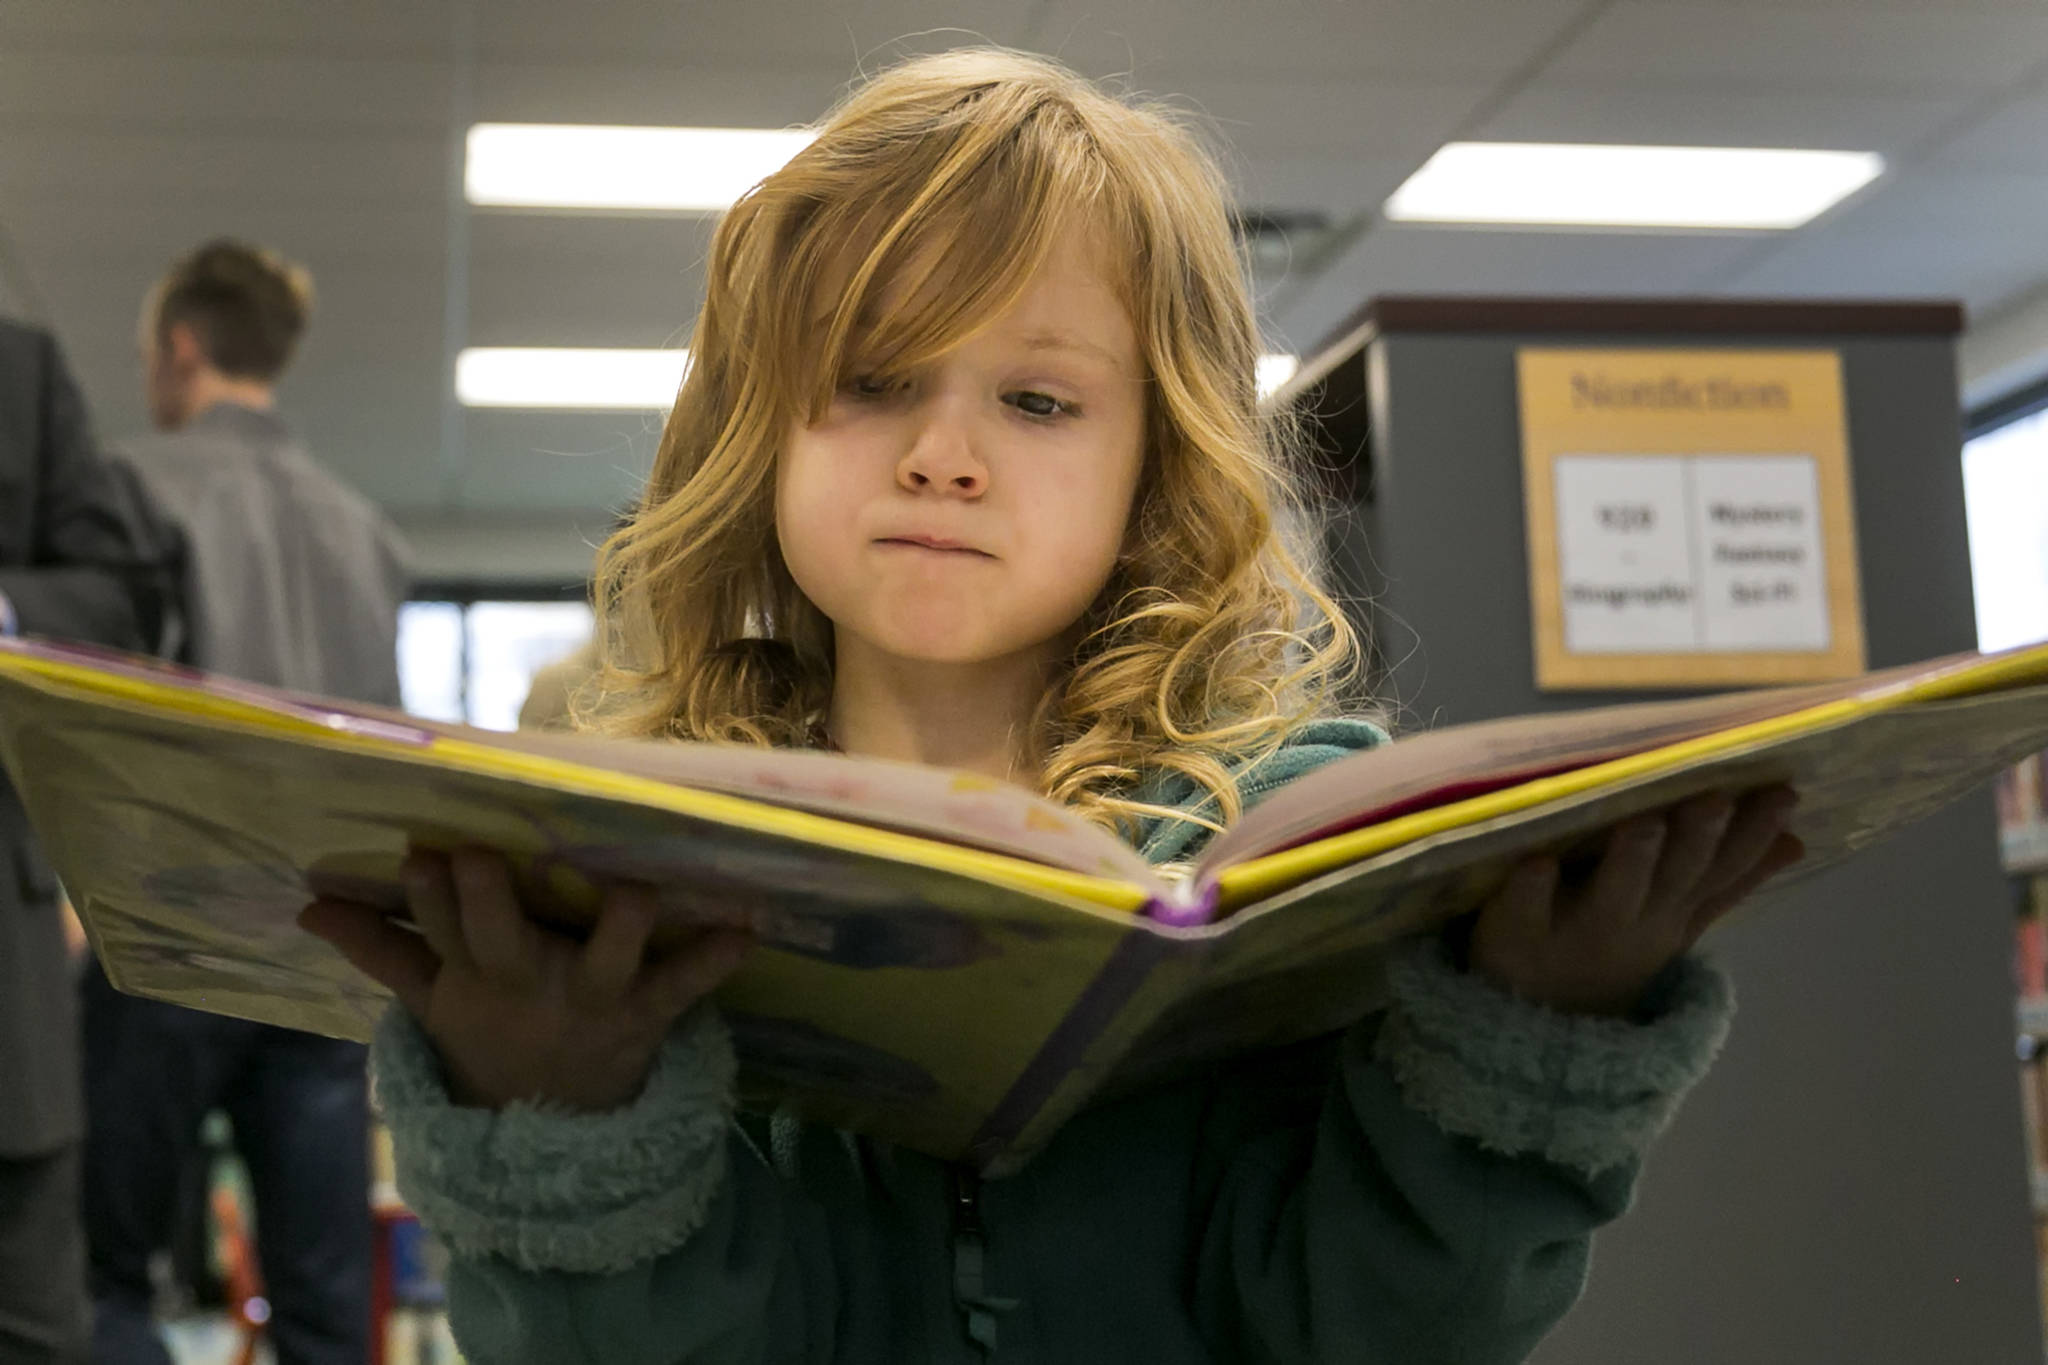 Paisley Molnick, 5, reads a book during the grand opening of the new Sno-Isle Libraries branch at Lakewood/Smokey Point in January. Sno-Isle Libraries is seeking voter approval of a levy increase in the April 24 special election. (Kevin Clark/The Daily Herald)